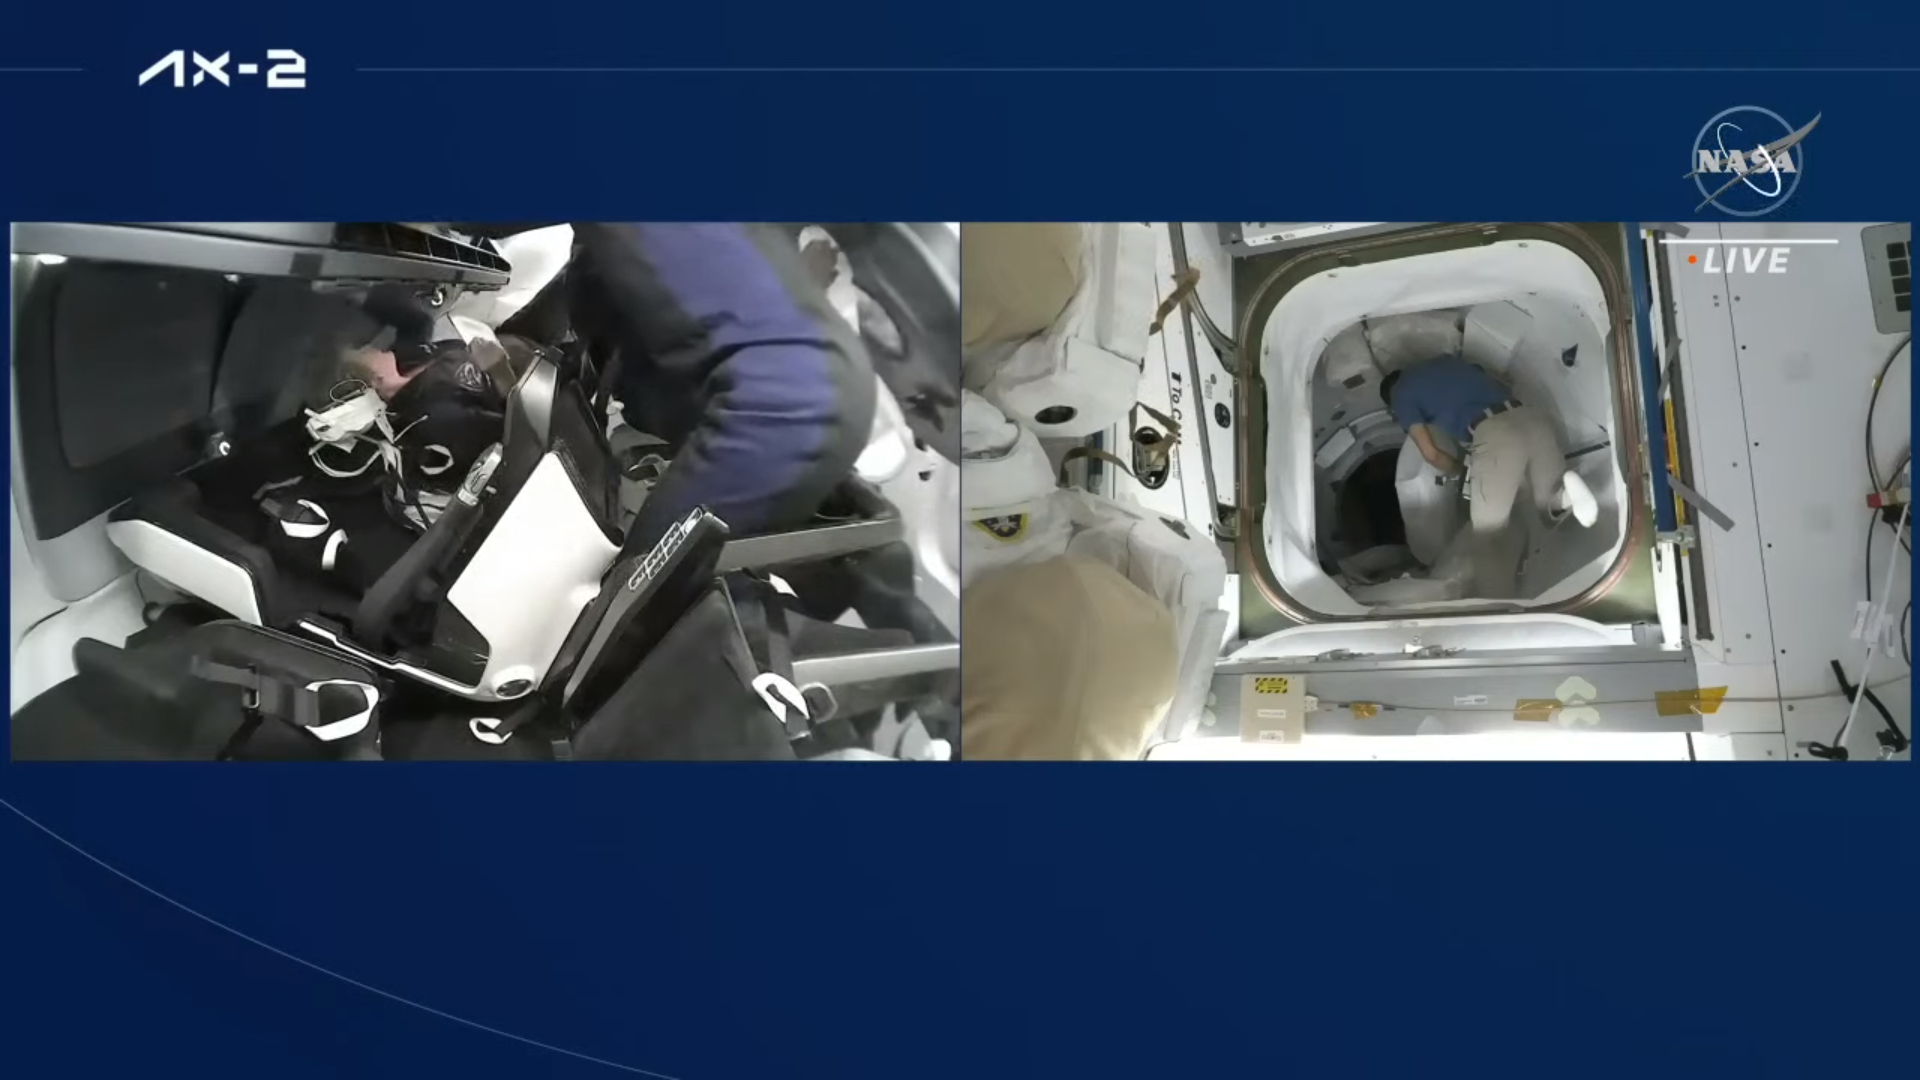 Split screen showing astronauts inside Ax-2 Dragon capsule on left and space station on right